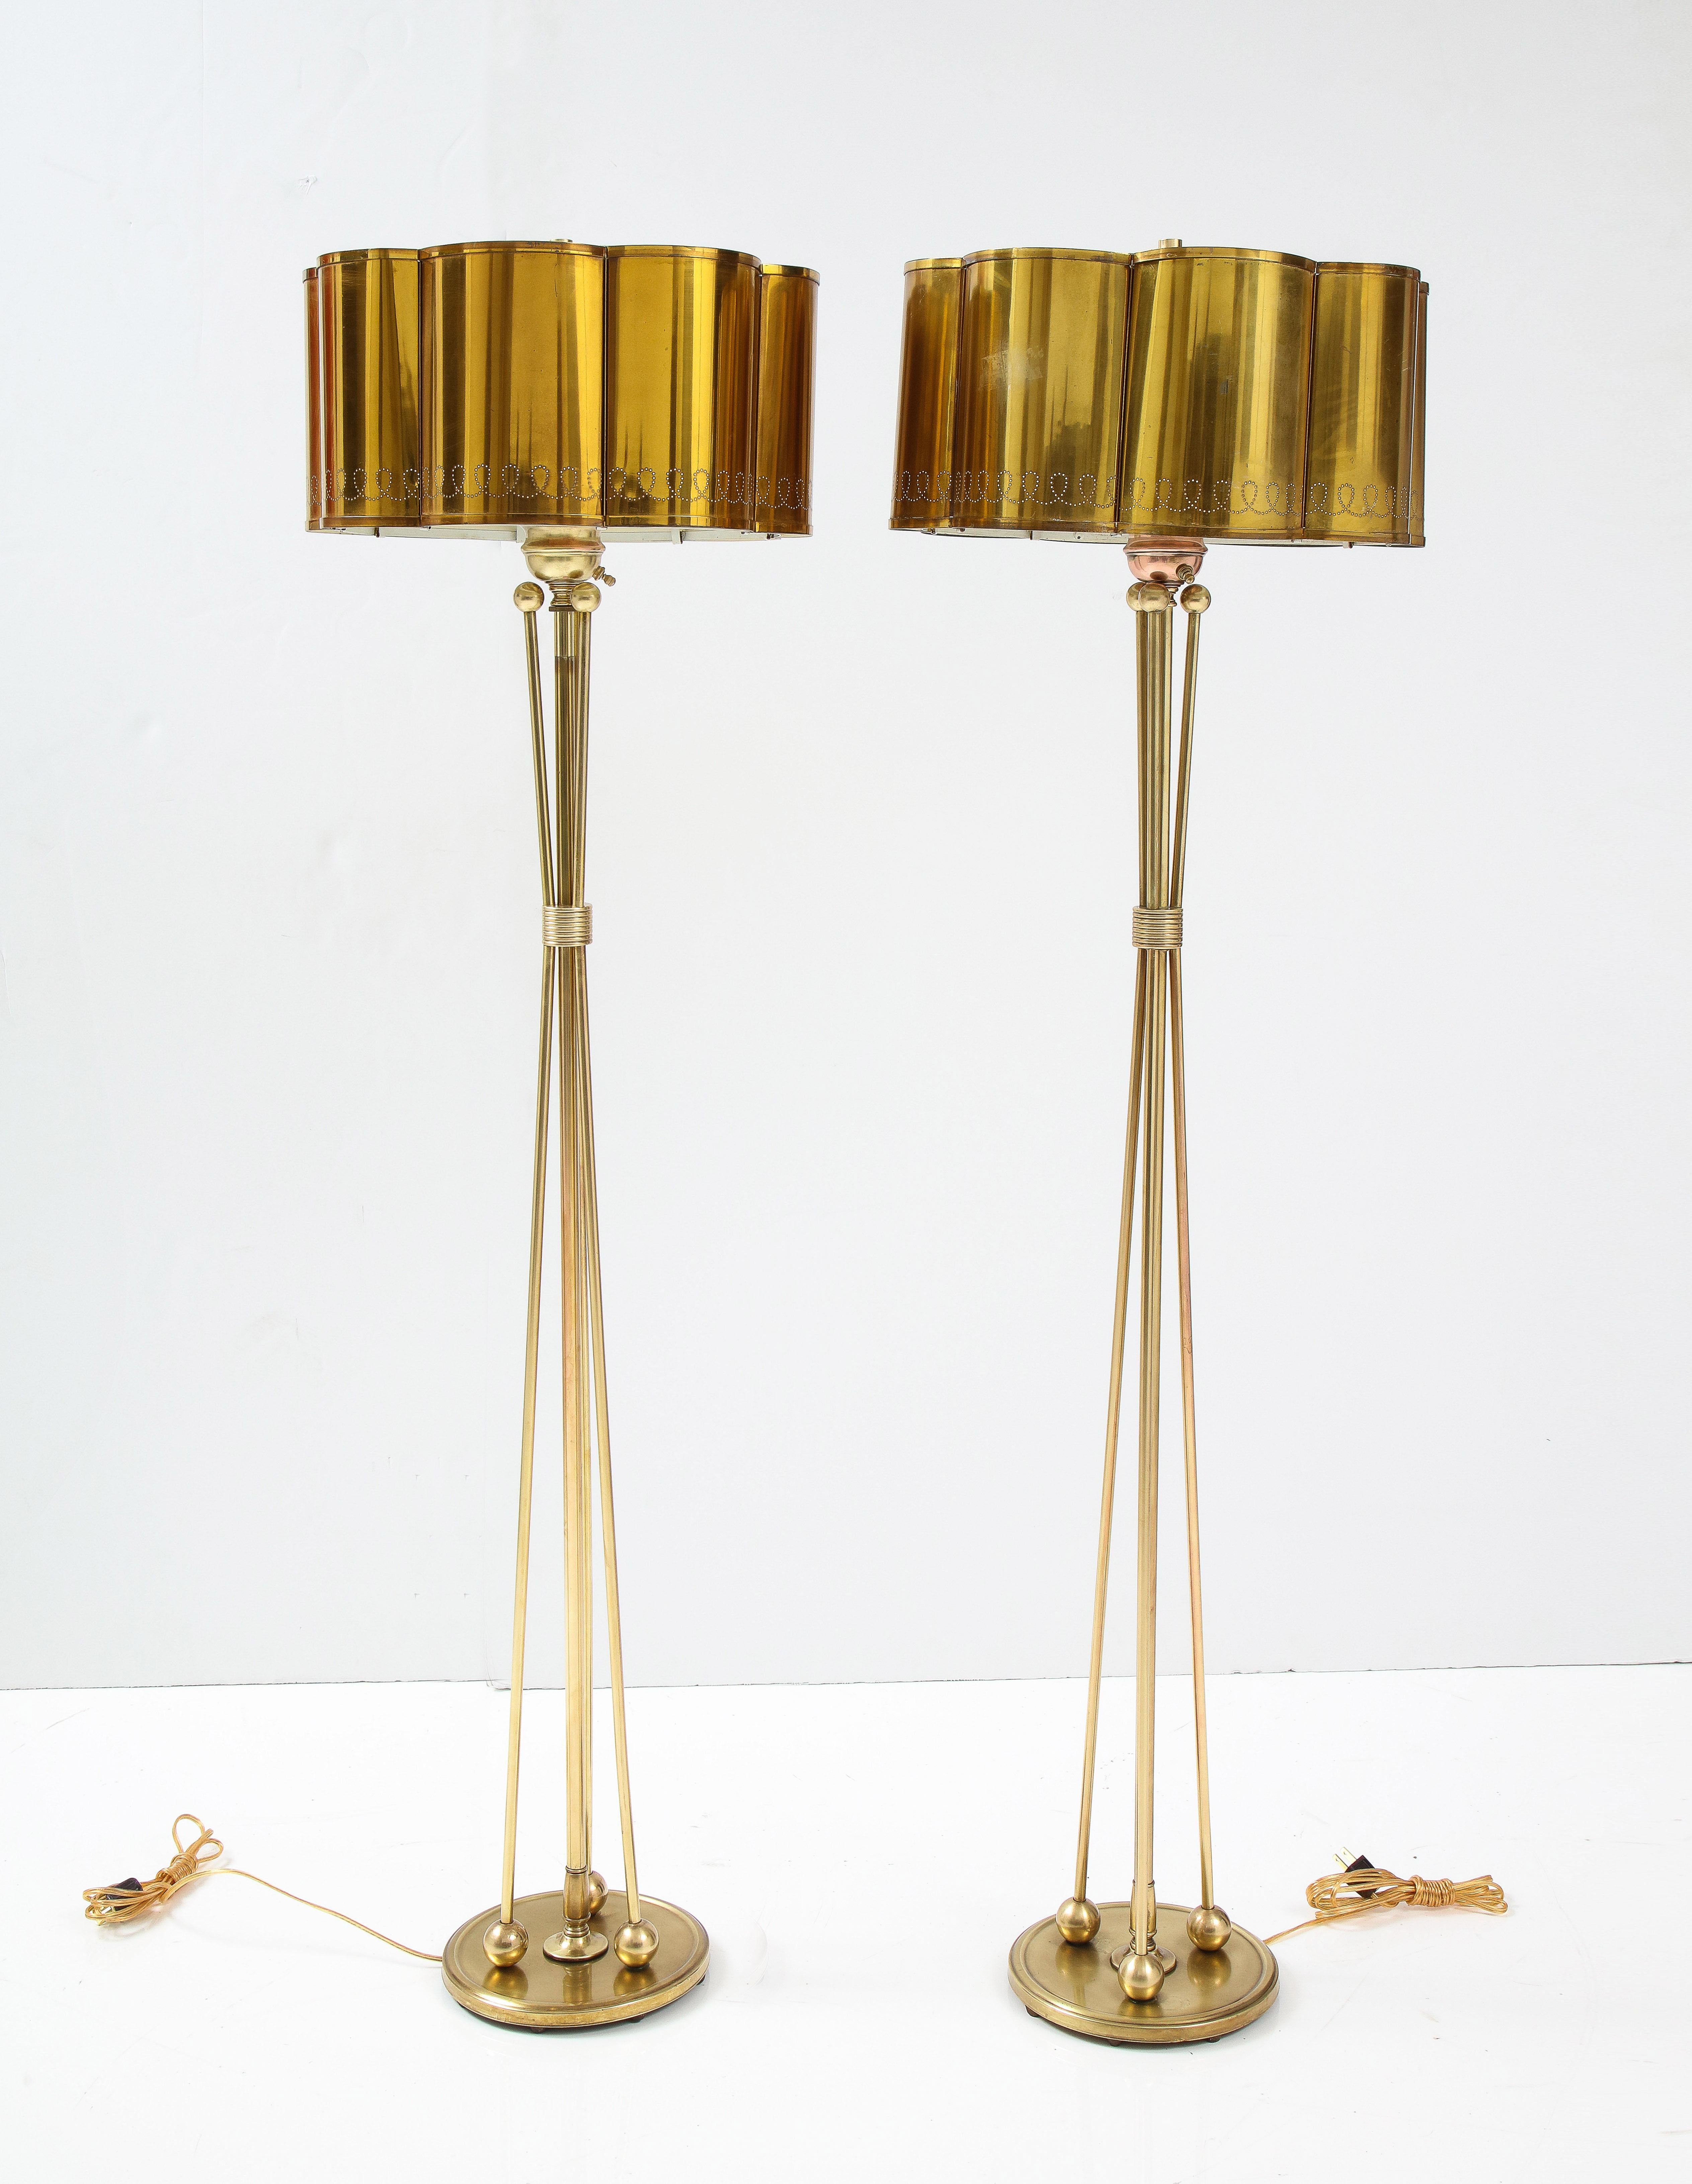 1950's French Solid Brass with Perforated Lamps Shades Tripod Floor Lamps 5